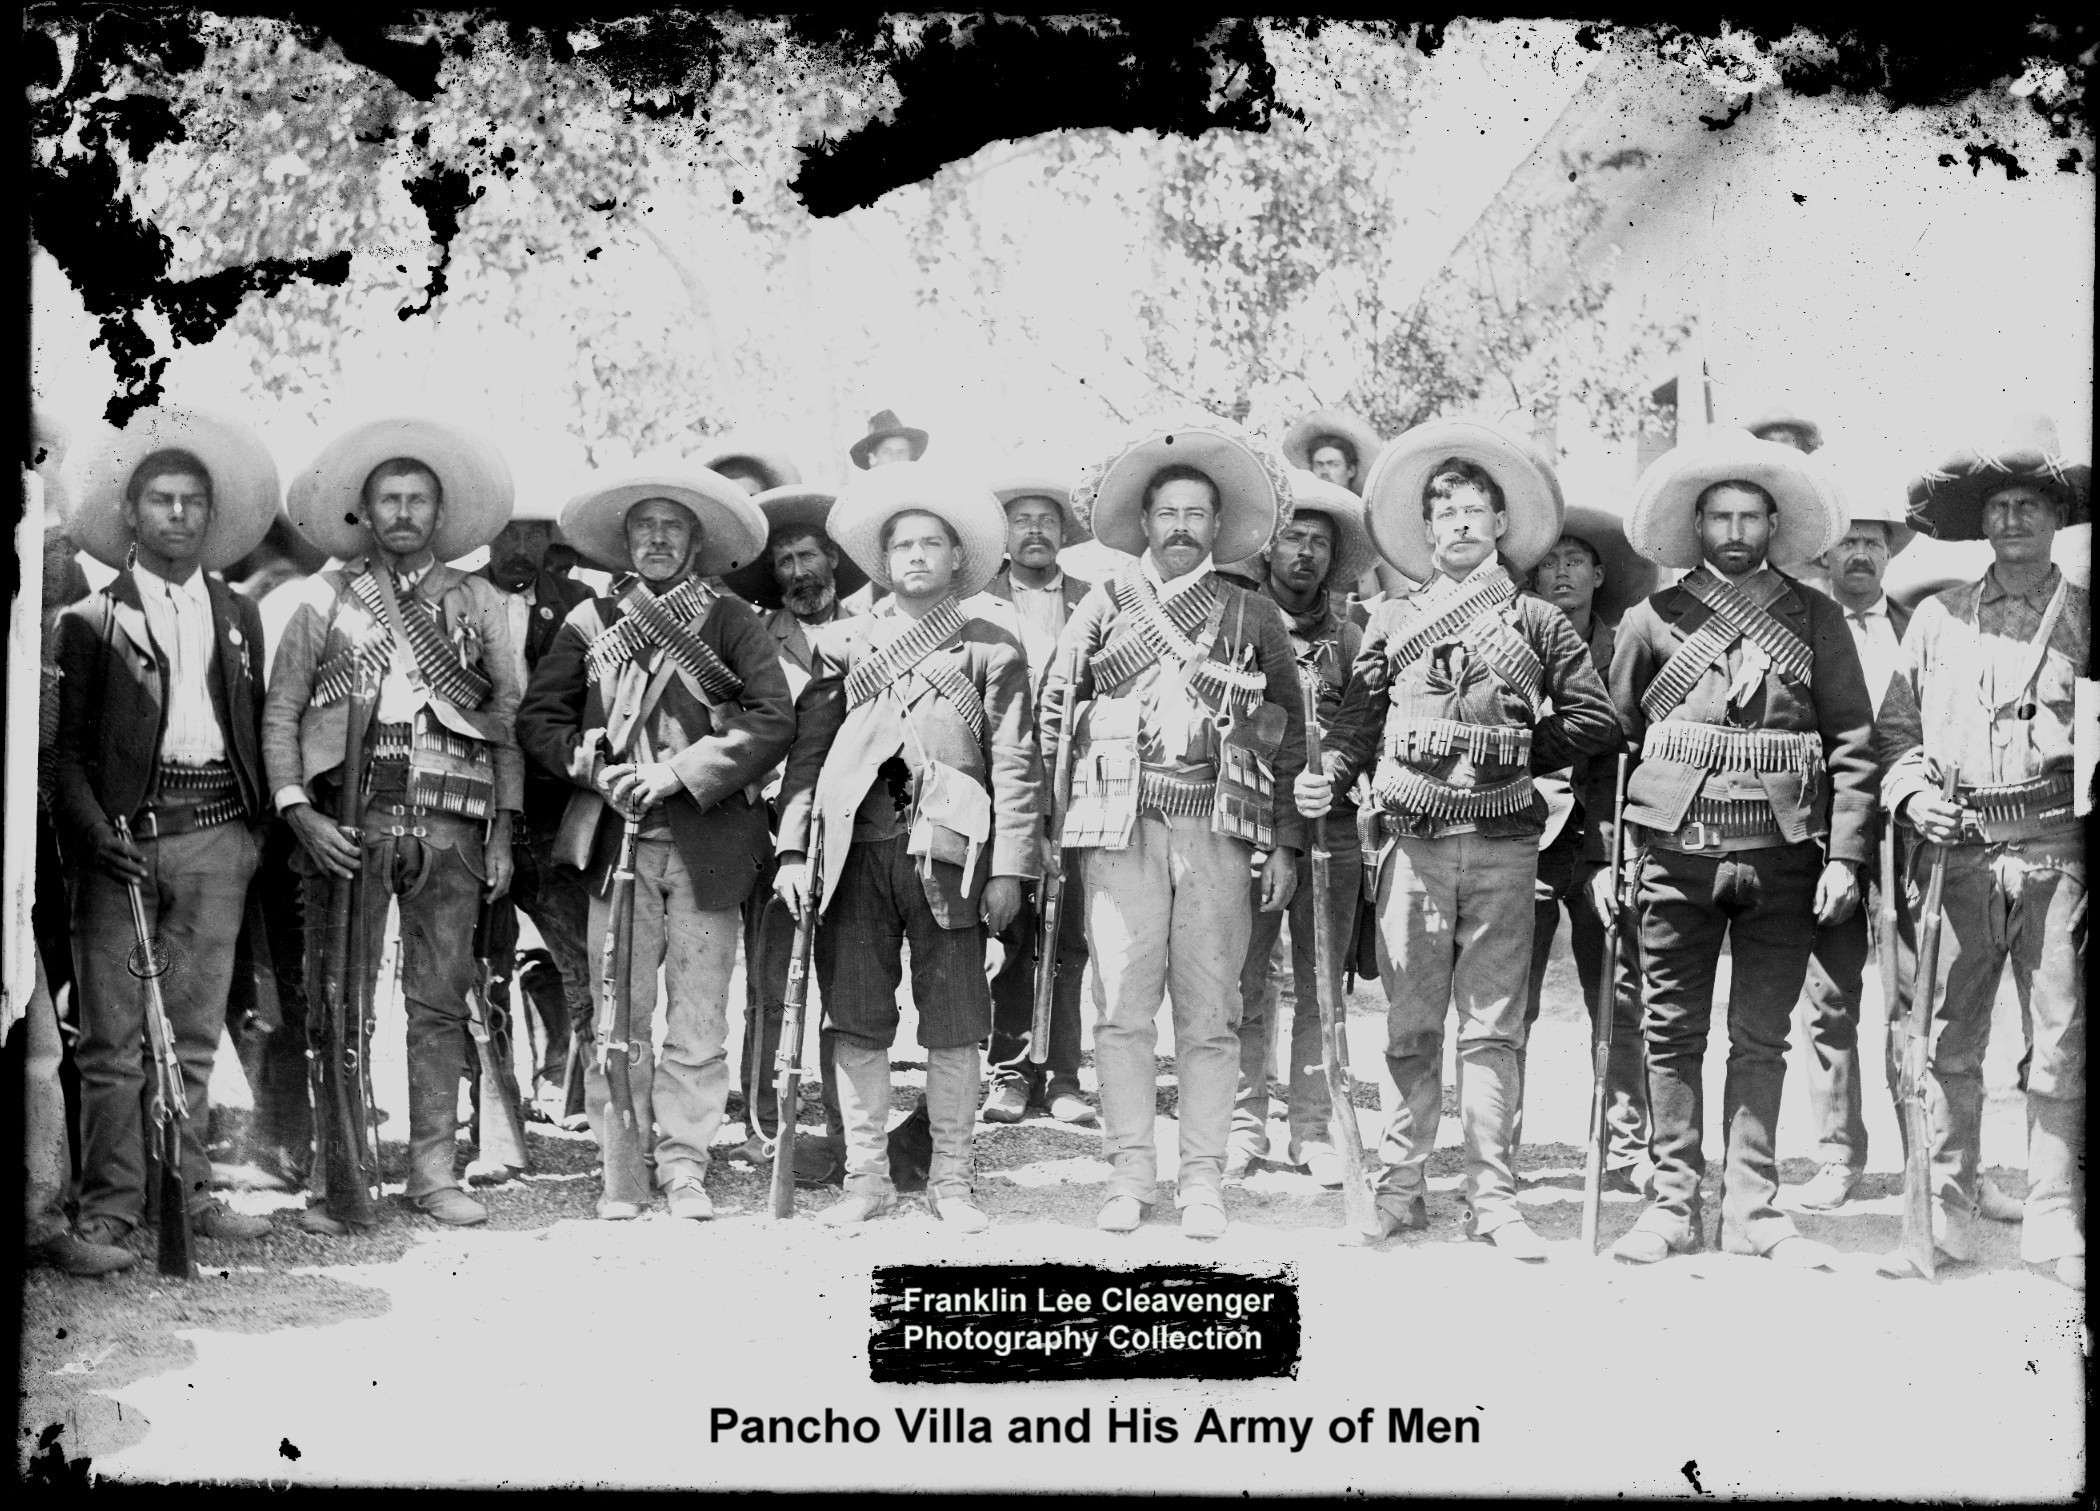 Pancho Villa and His Army of Men - Franklin Lee Cleavenger Photography Collection